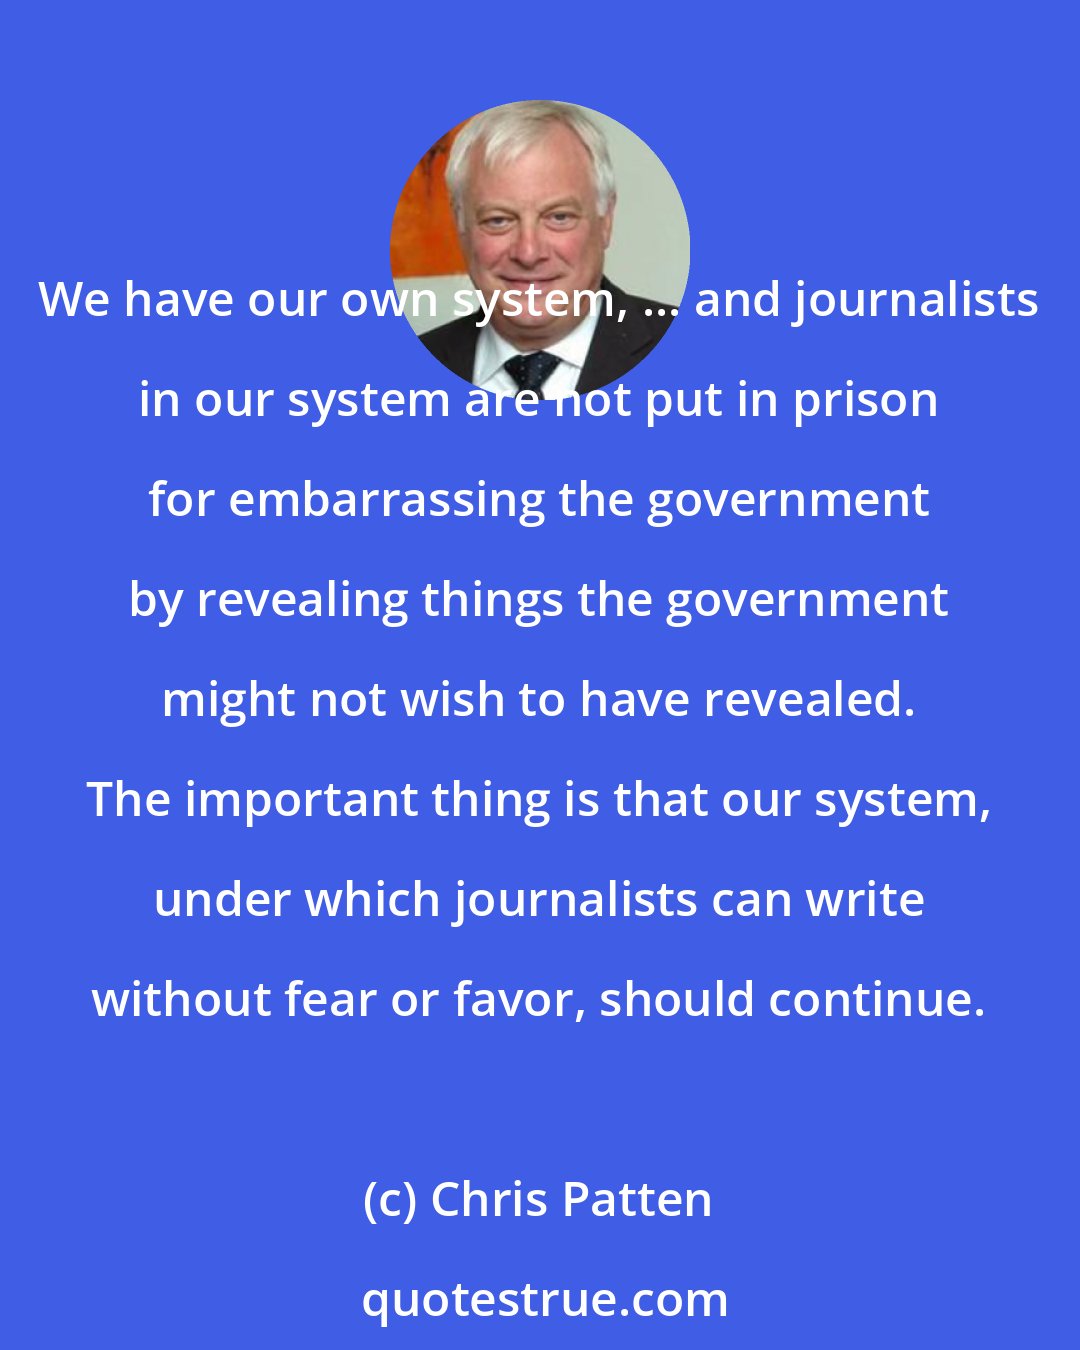 Chris Patten: We have our own system, ... and journalists in our system are not put in prison for embarrassing the government by revealing things the government might not wish to have revealed. The important thing is that our system, under which journalists can write without fear or favor, should continue.